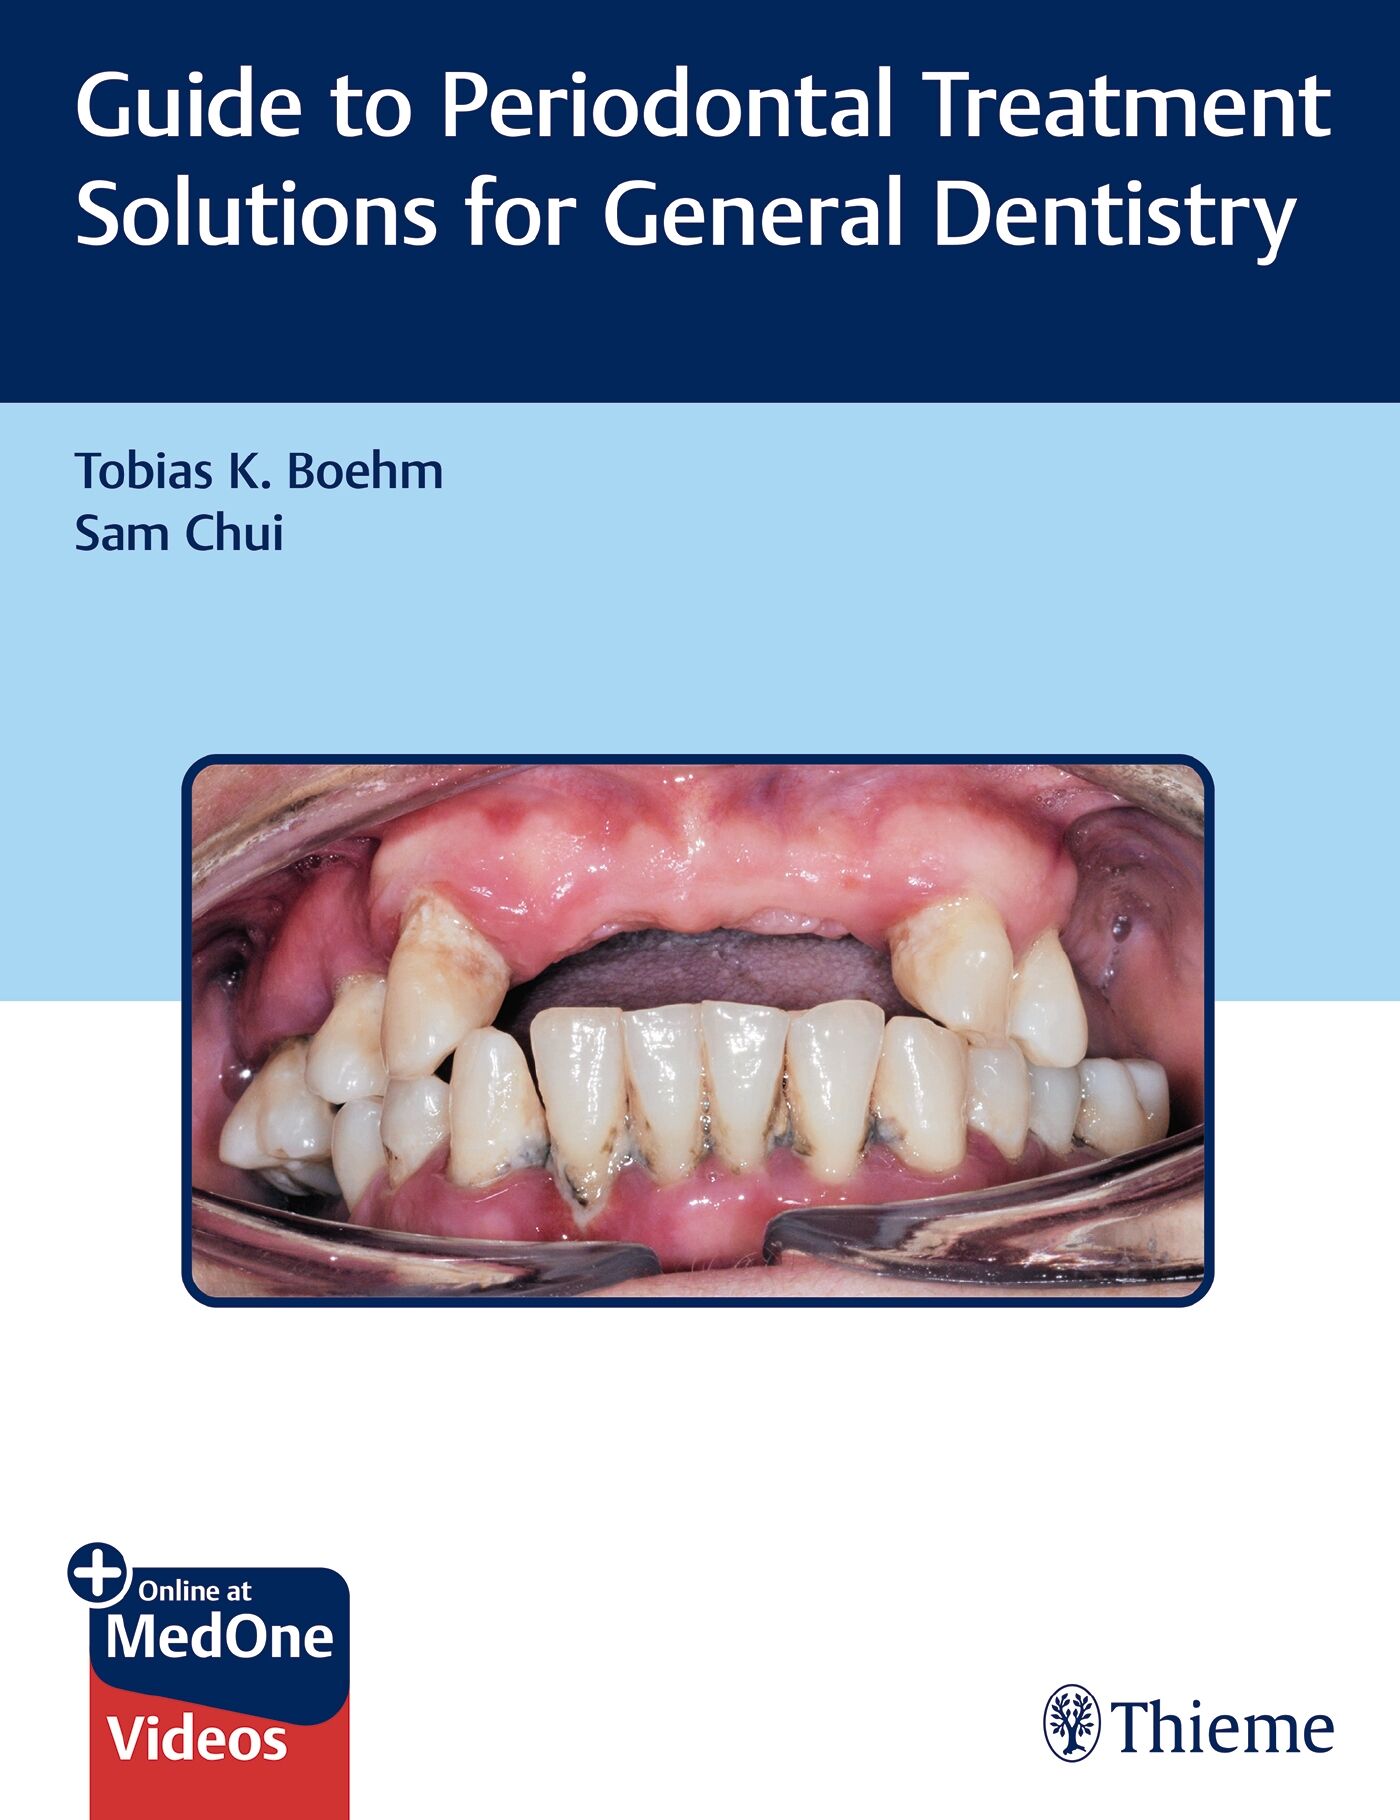 Guide to Periodontal Treatment Solutions for General Dentistry, 9781626238008